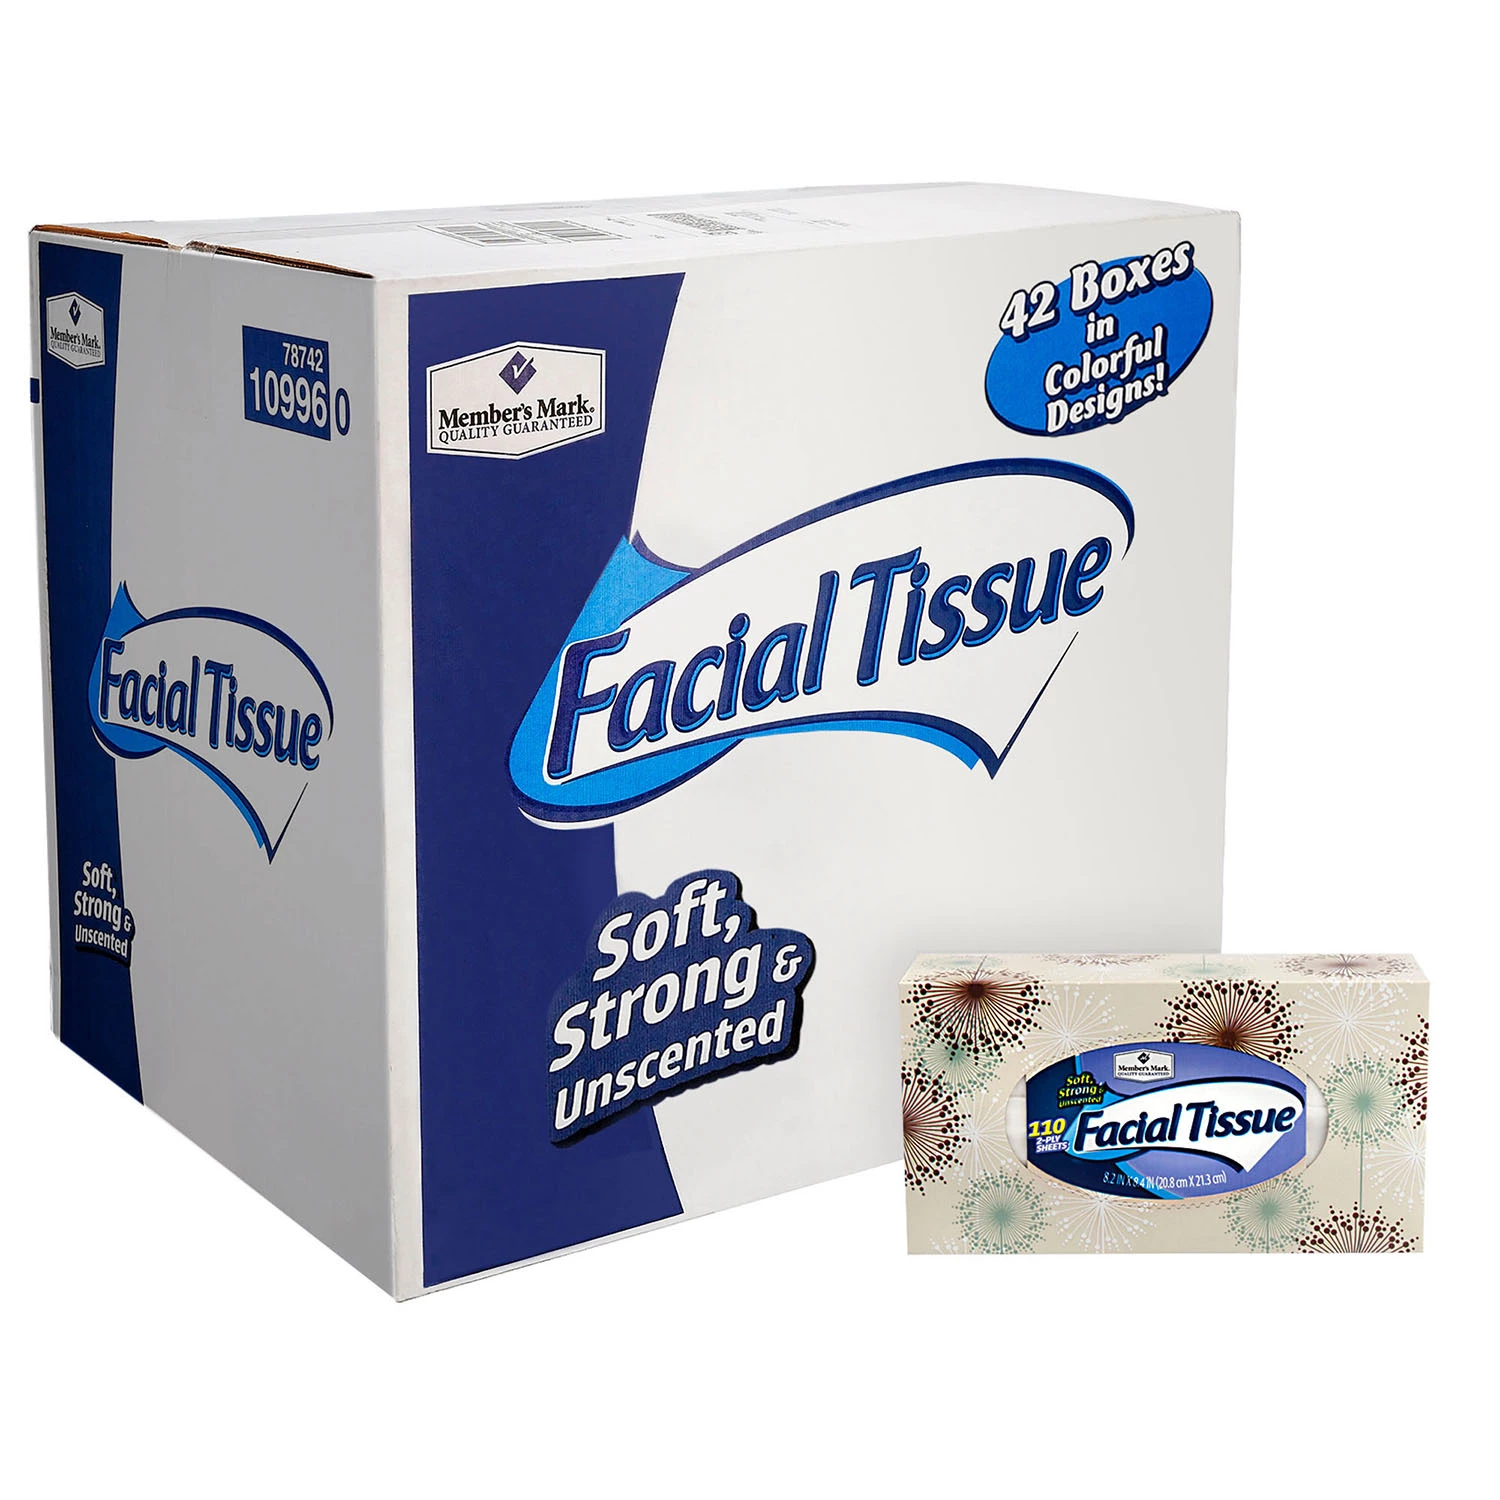 Member’s Mark 2-Ply Soft and Strong Facial Tissue, 42 pk., 4,620 tissues (110 ct. per box)